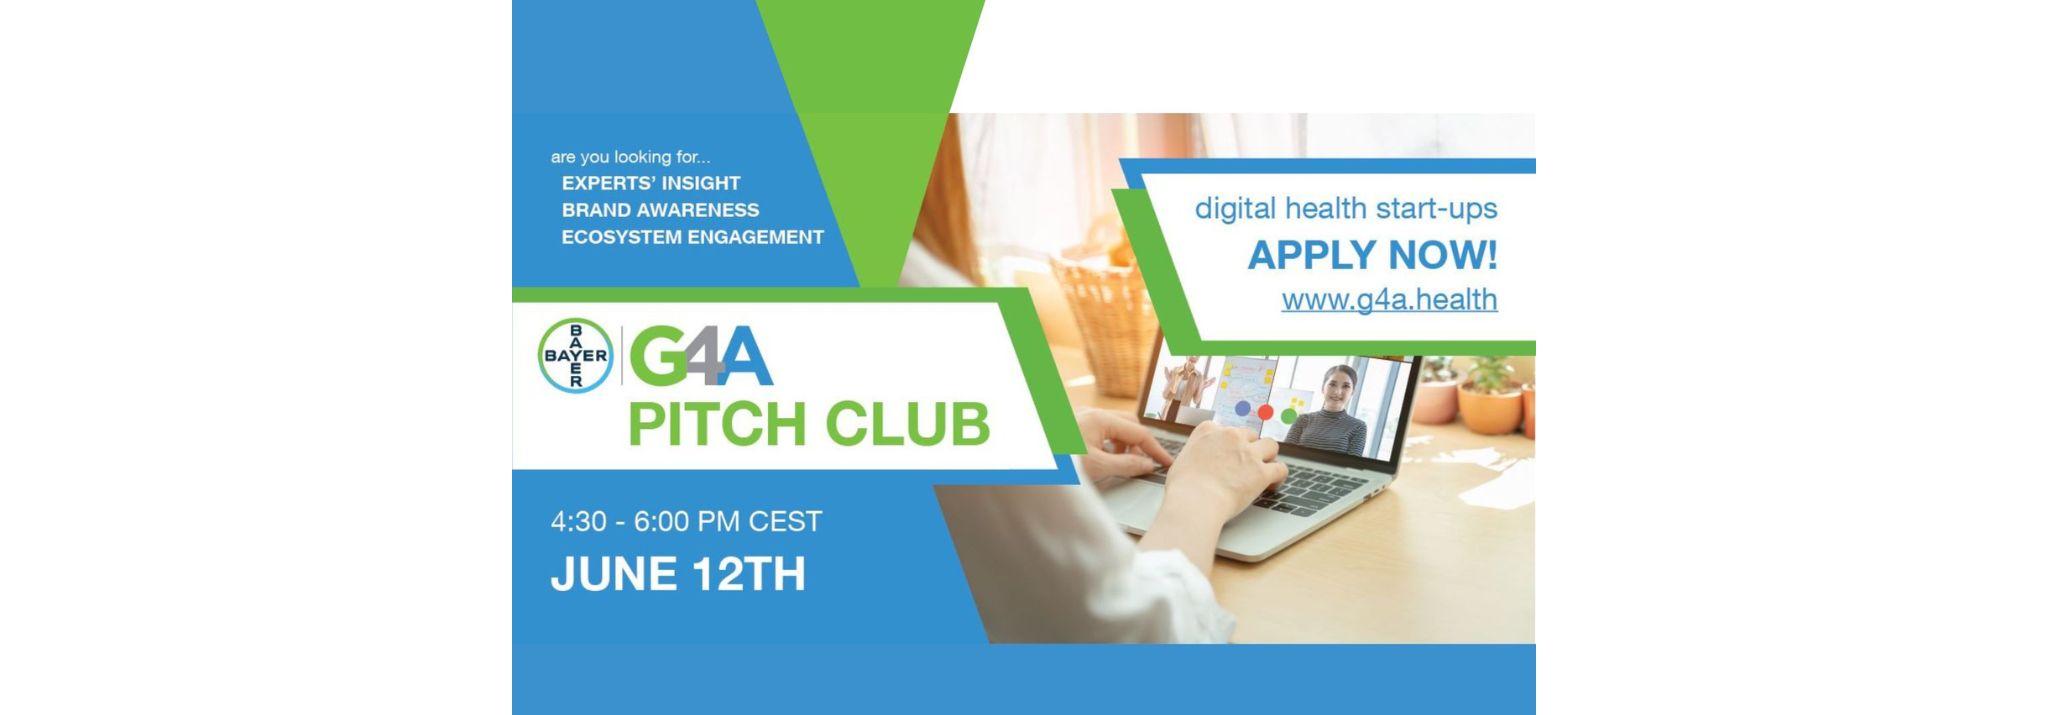 Sign up for the G4A's Pitch Club Application!